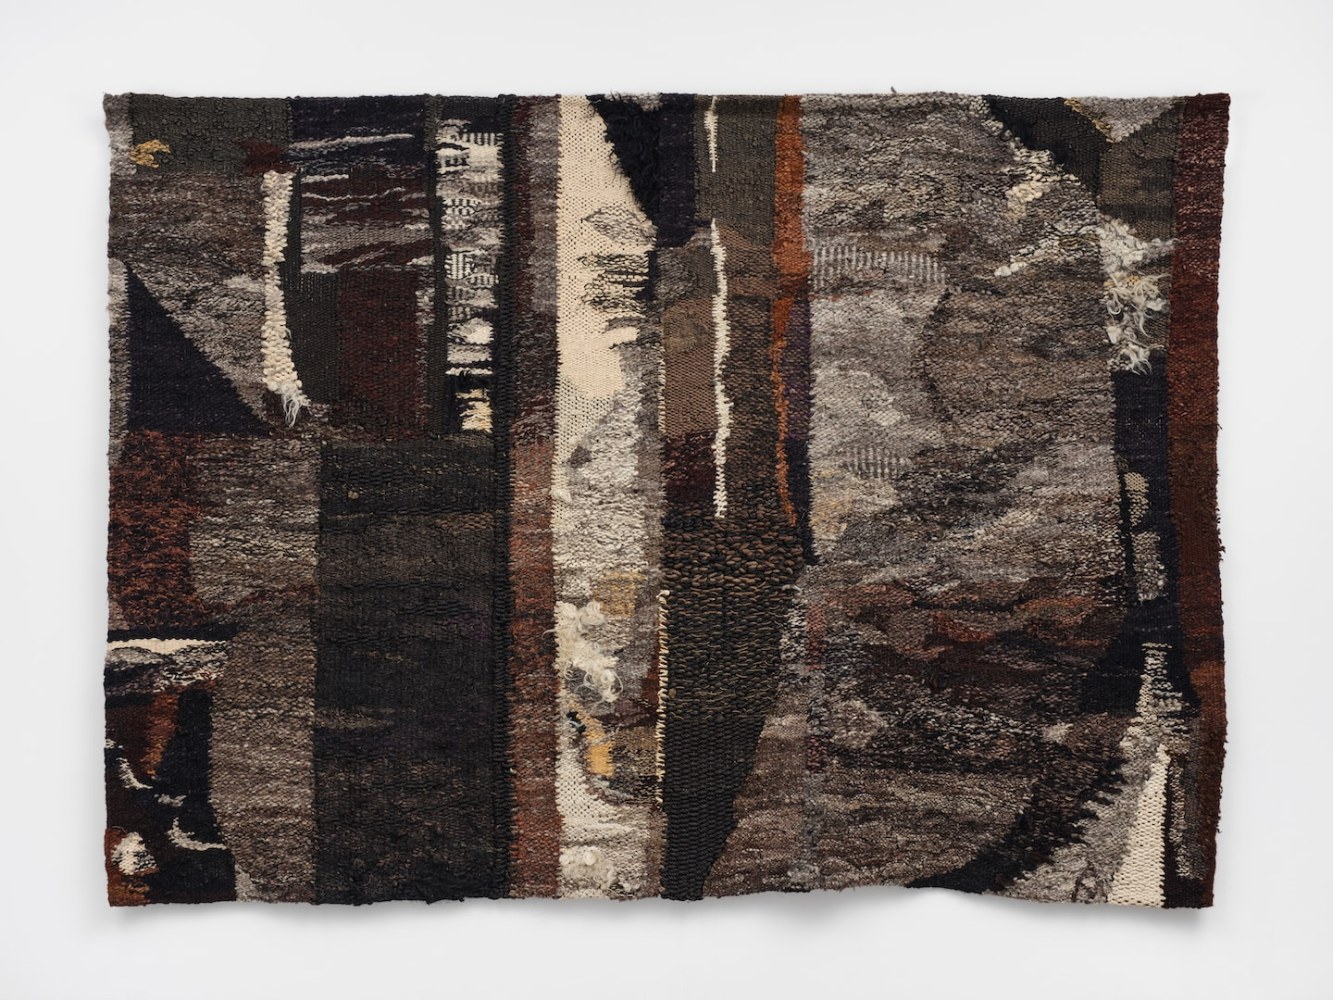 Ina, 1964
wool, cotton, sisal, horse hair, unique
80 5/8 x 116 1/8 in. / 204.8 x 295 cm